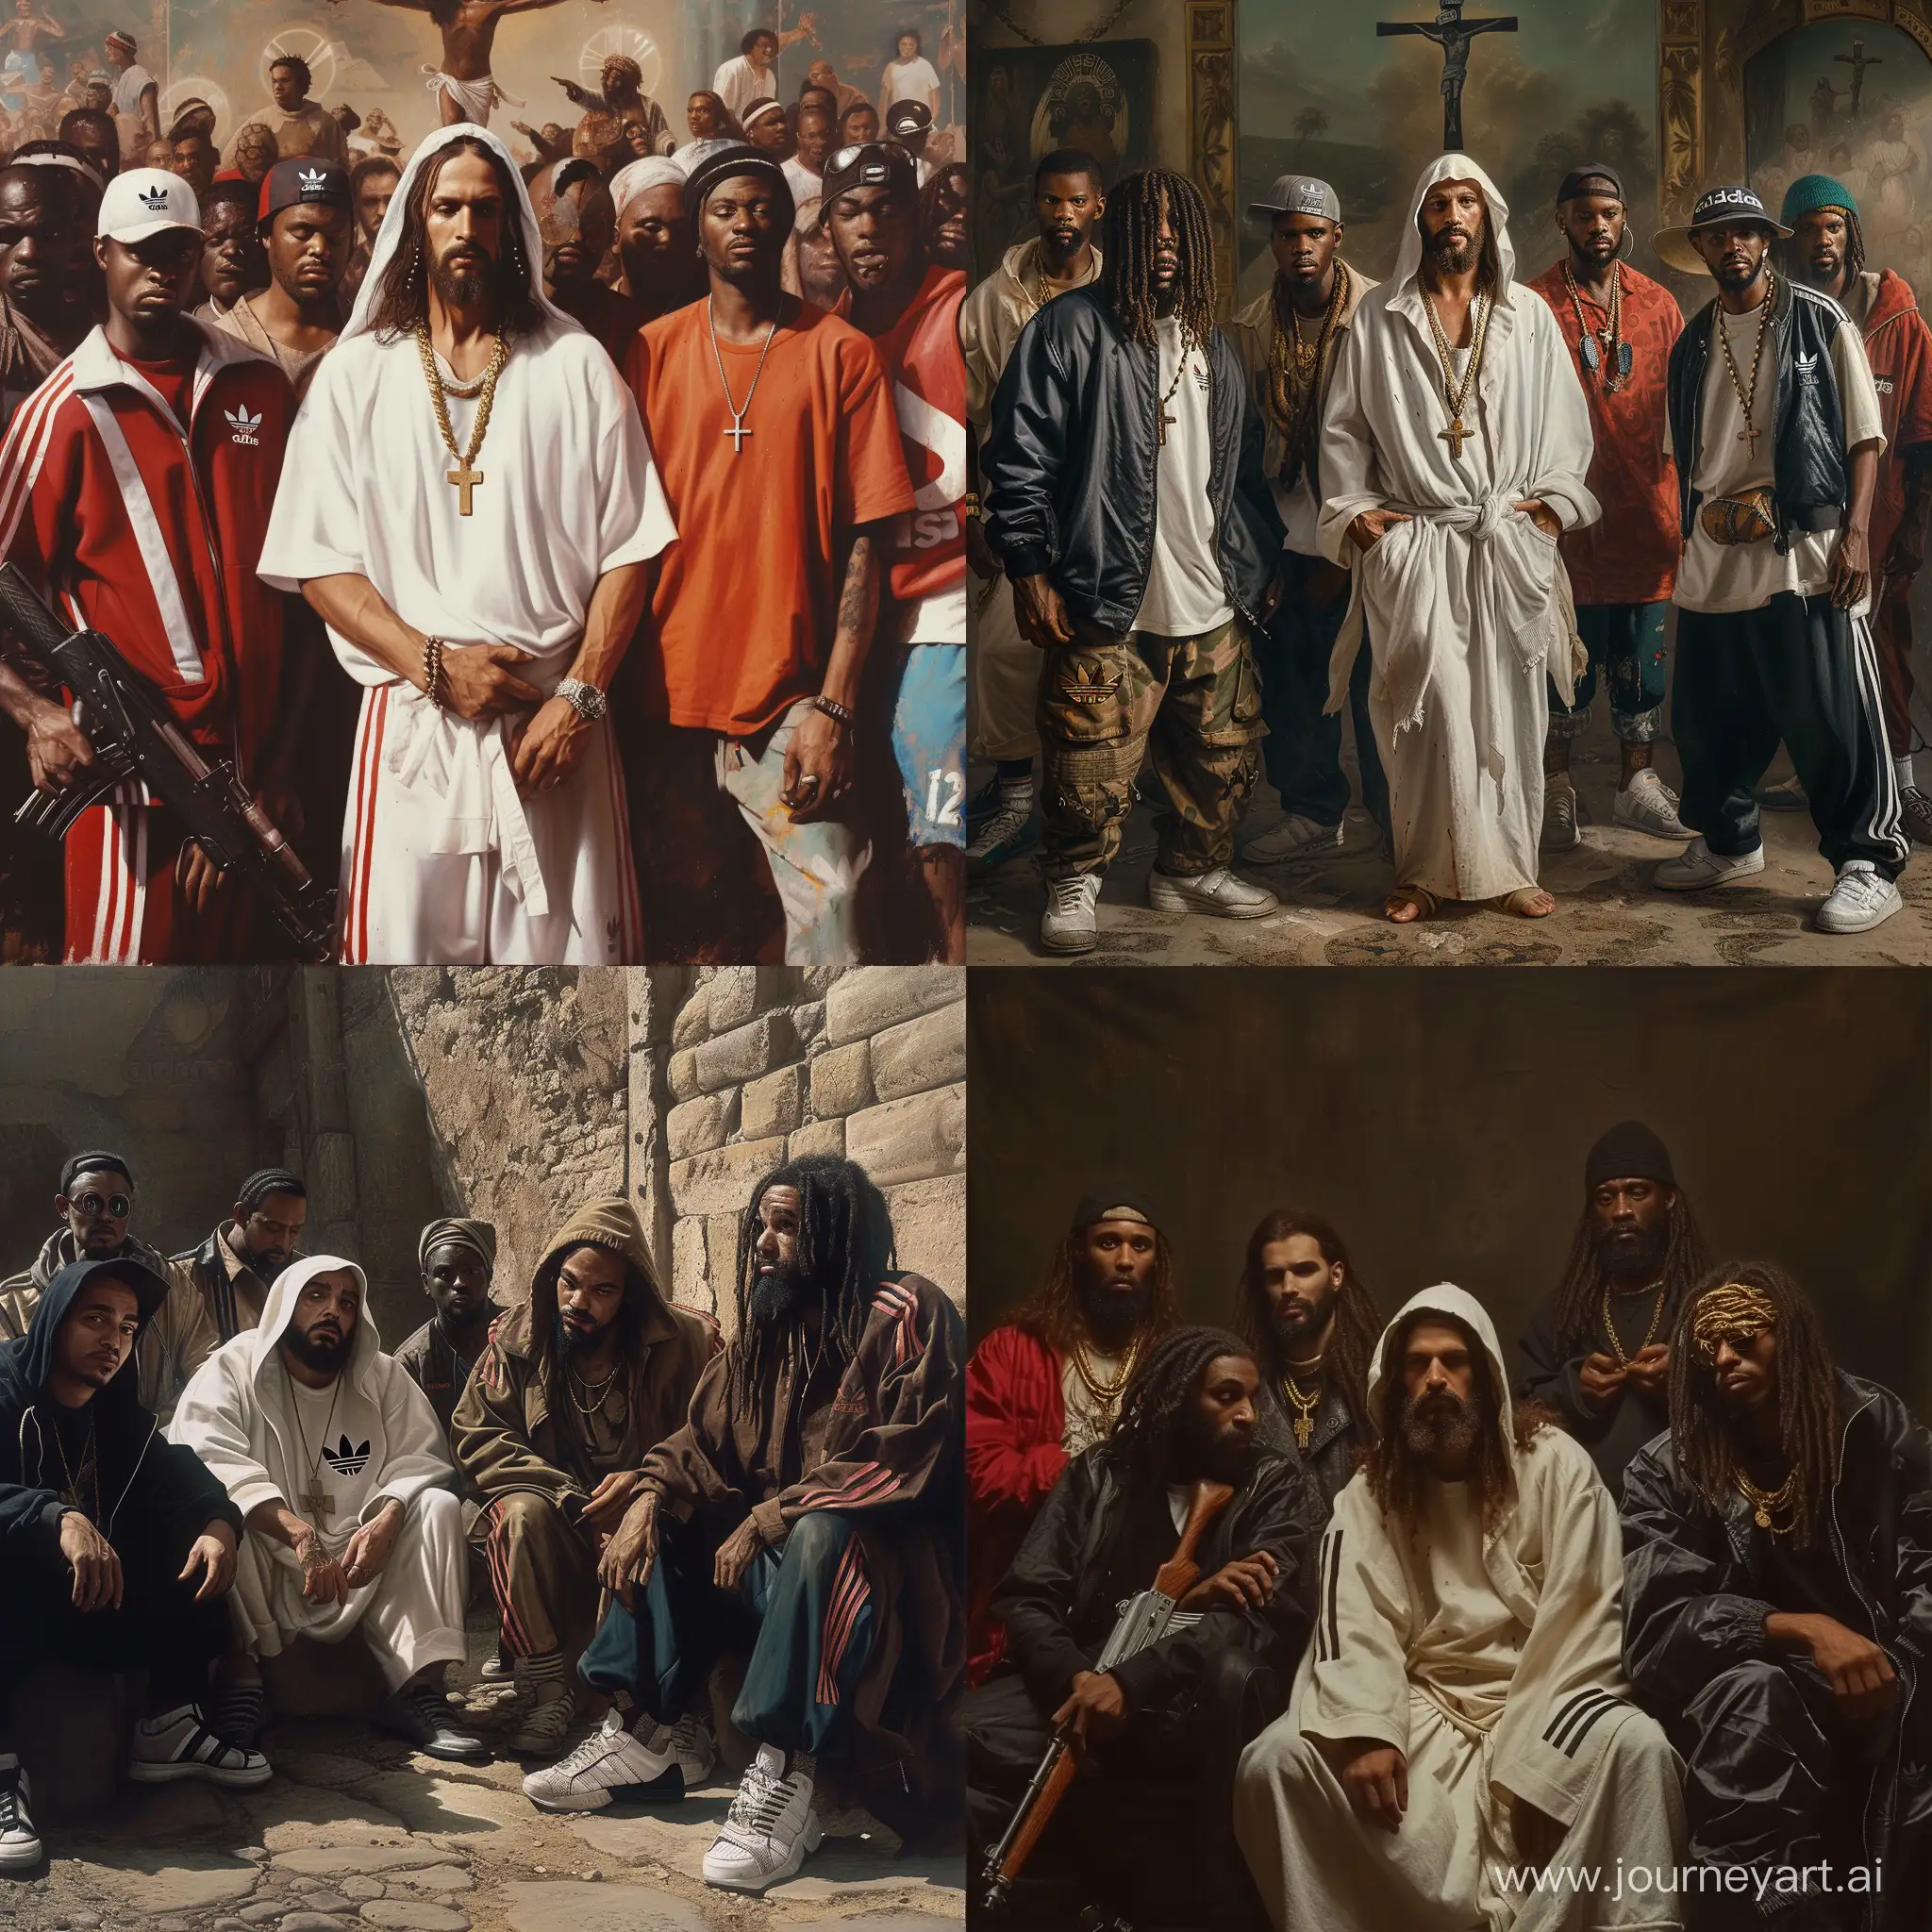 Divine-Encounter-Jesus-and-Gangsters-Unite-in-Stylish-Adidas-Apparel